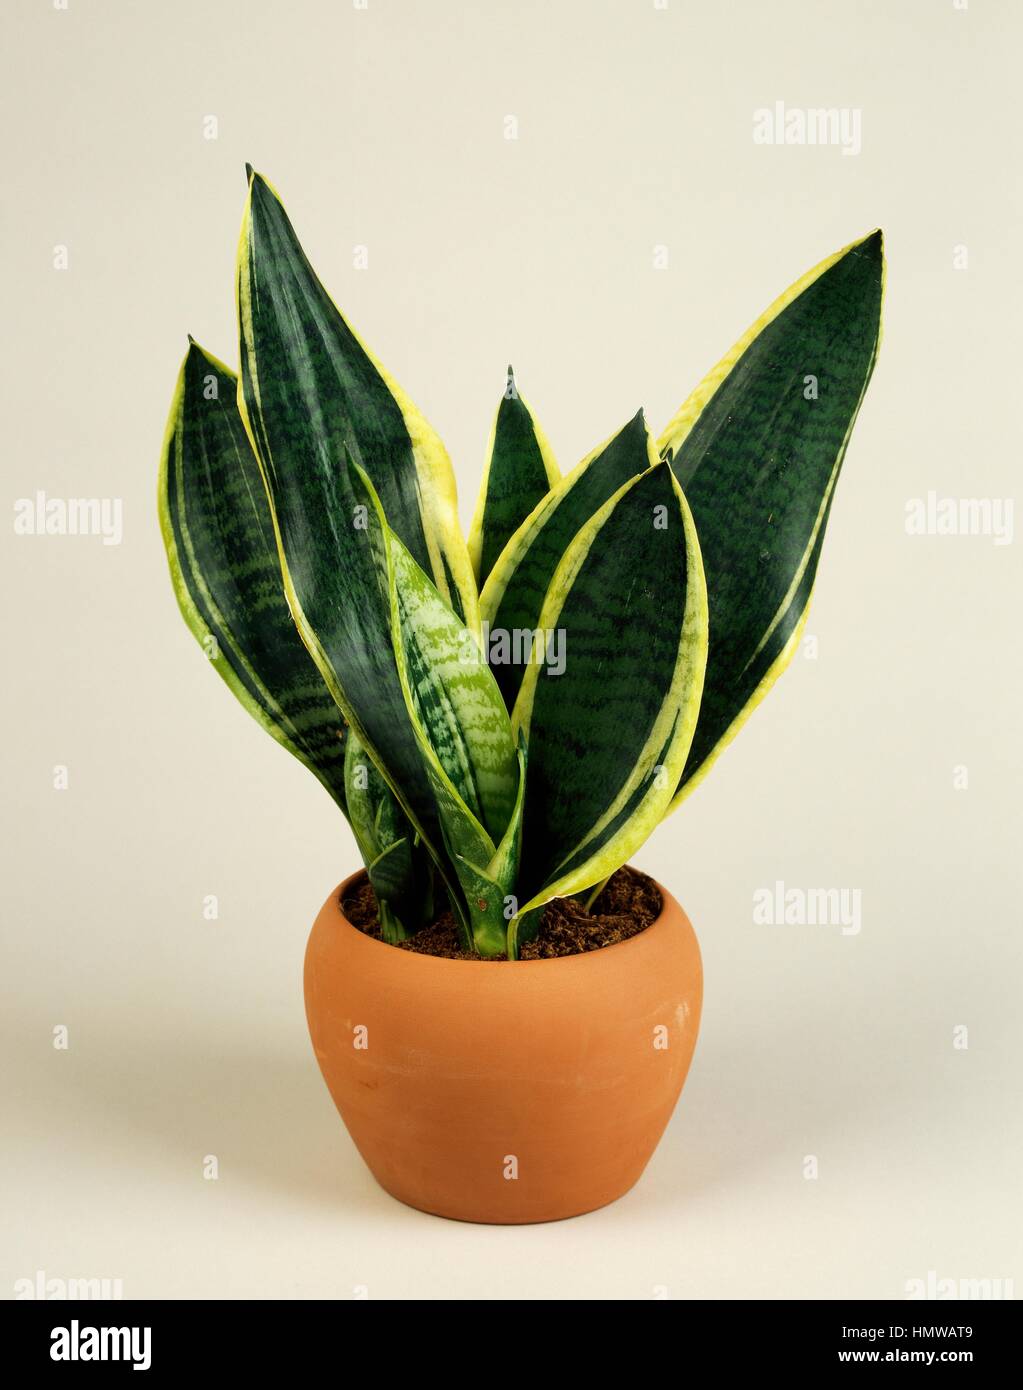 Snake sansevieria, Viper's bowstring hemp or Mother-in-law's tongue (Sansevieria hahnii), Asparagaceae. Stock Photo